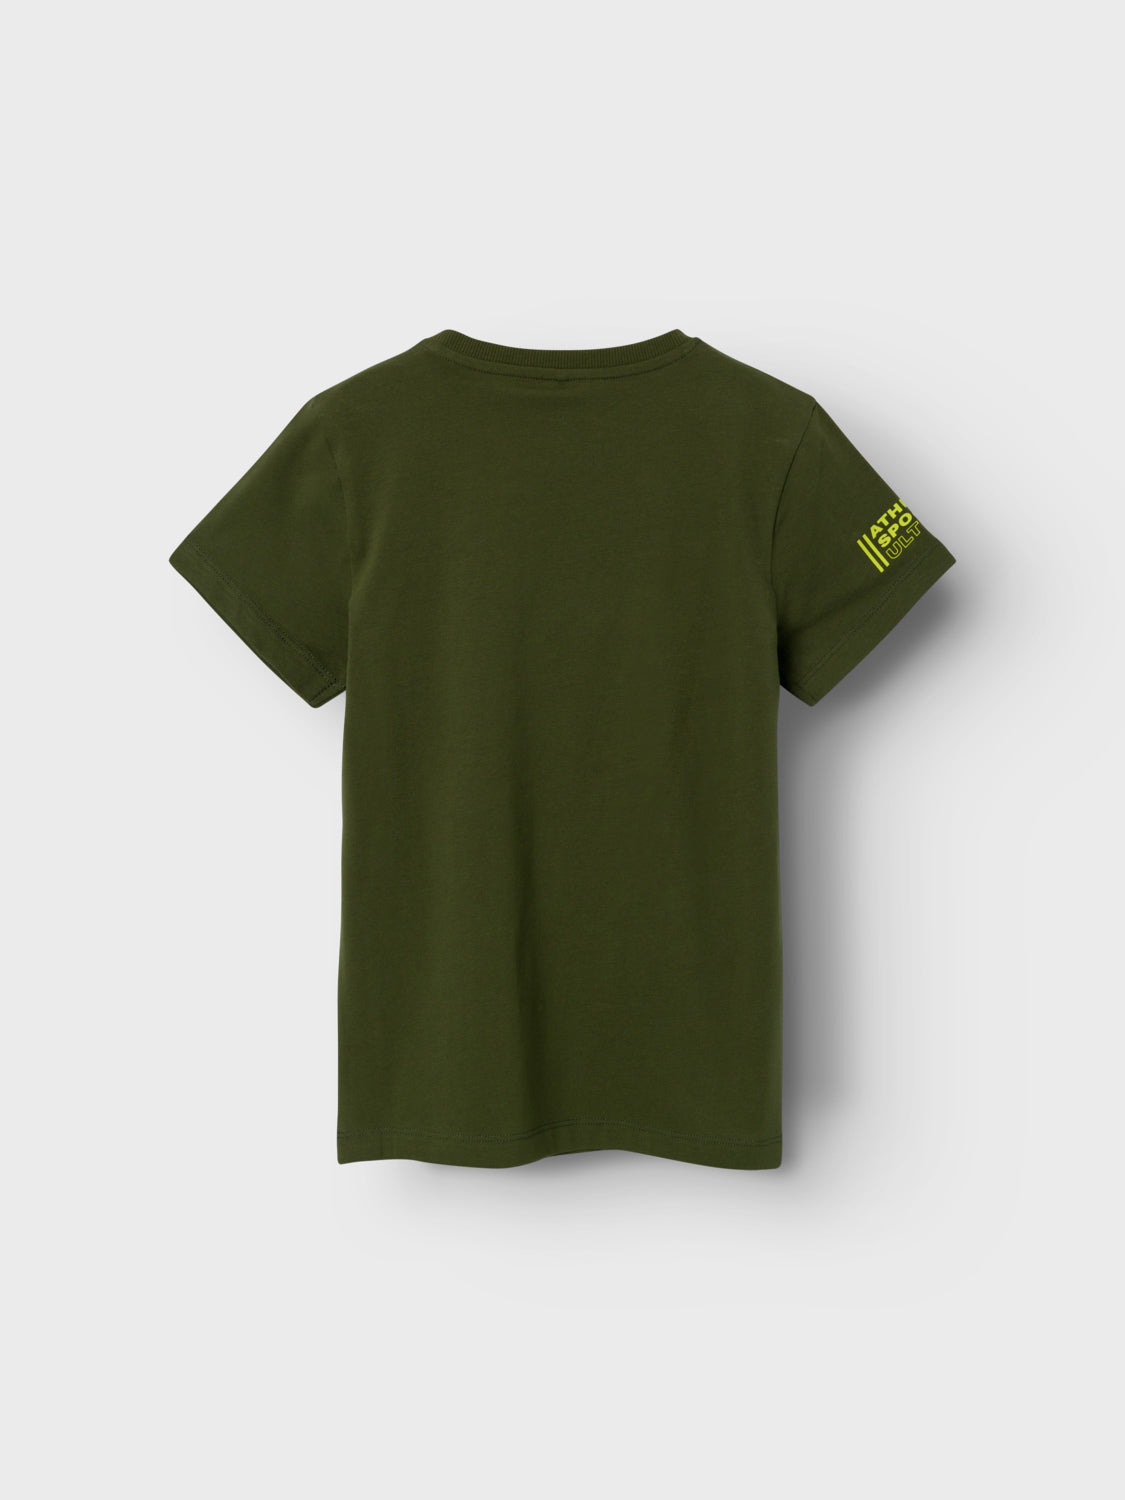 NKMKRIAN T-Shirts & Tops - Rifle Green